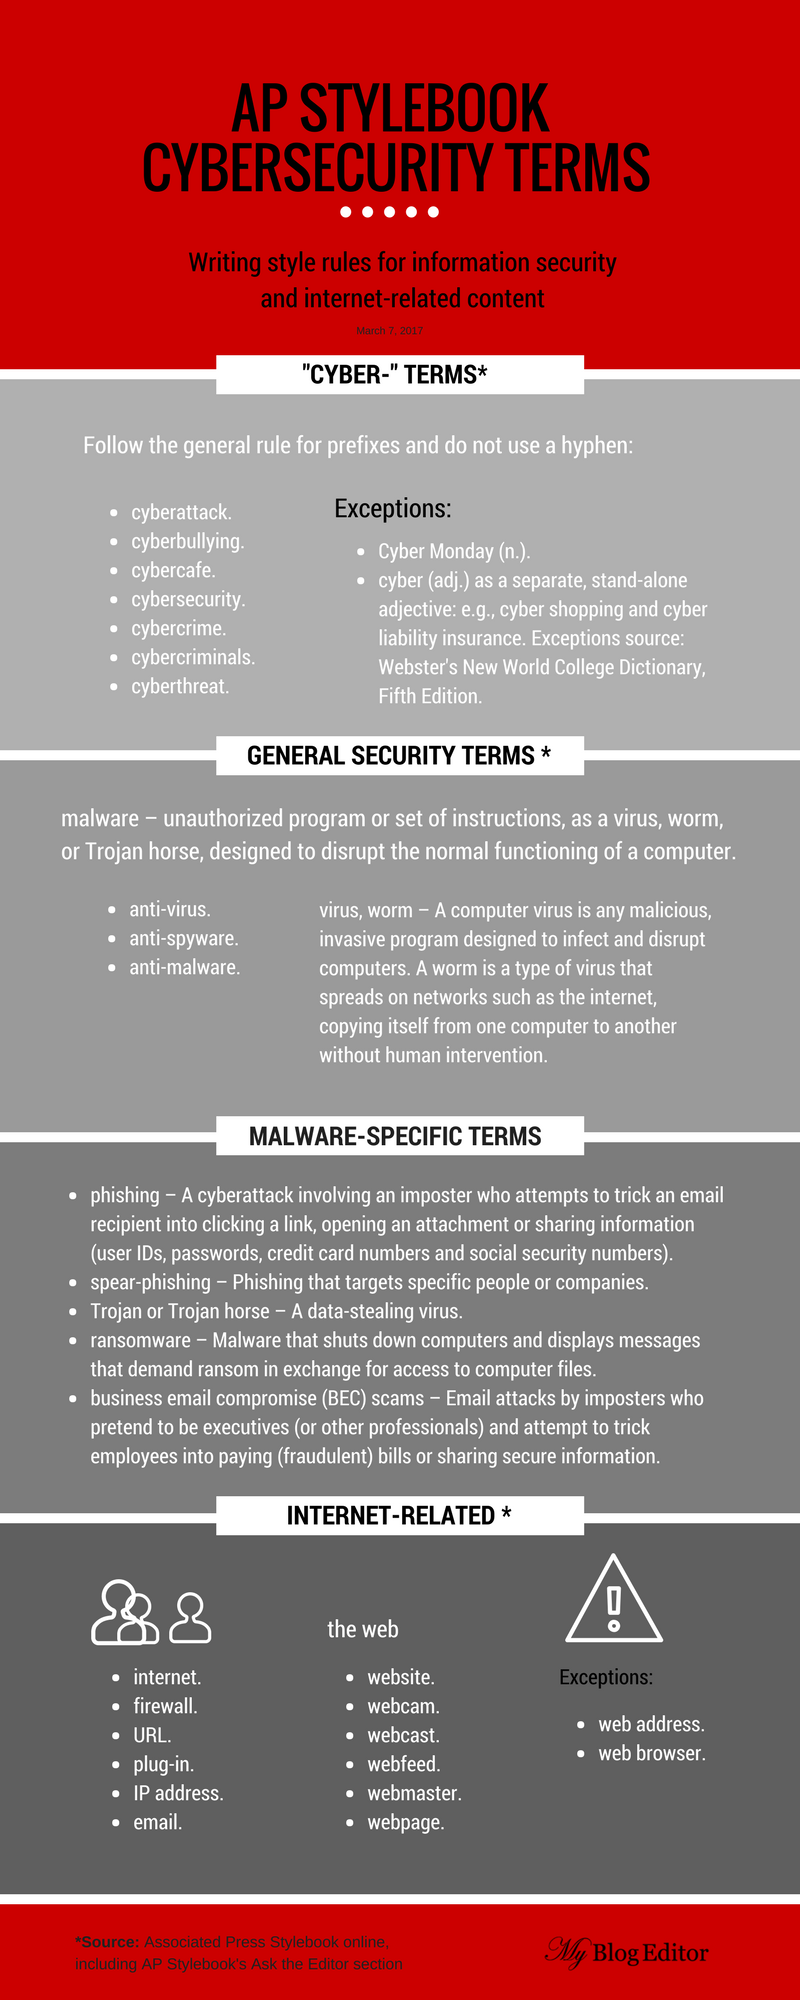 Infographic: Cybersecurity, internet terms (correct spelling, punctuation) via the Associated Press Stylebook